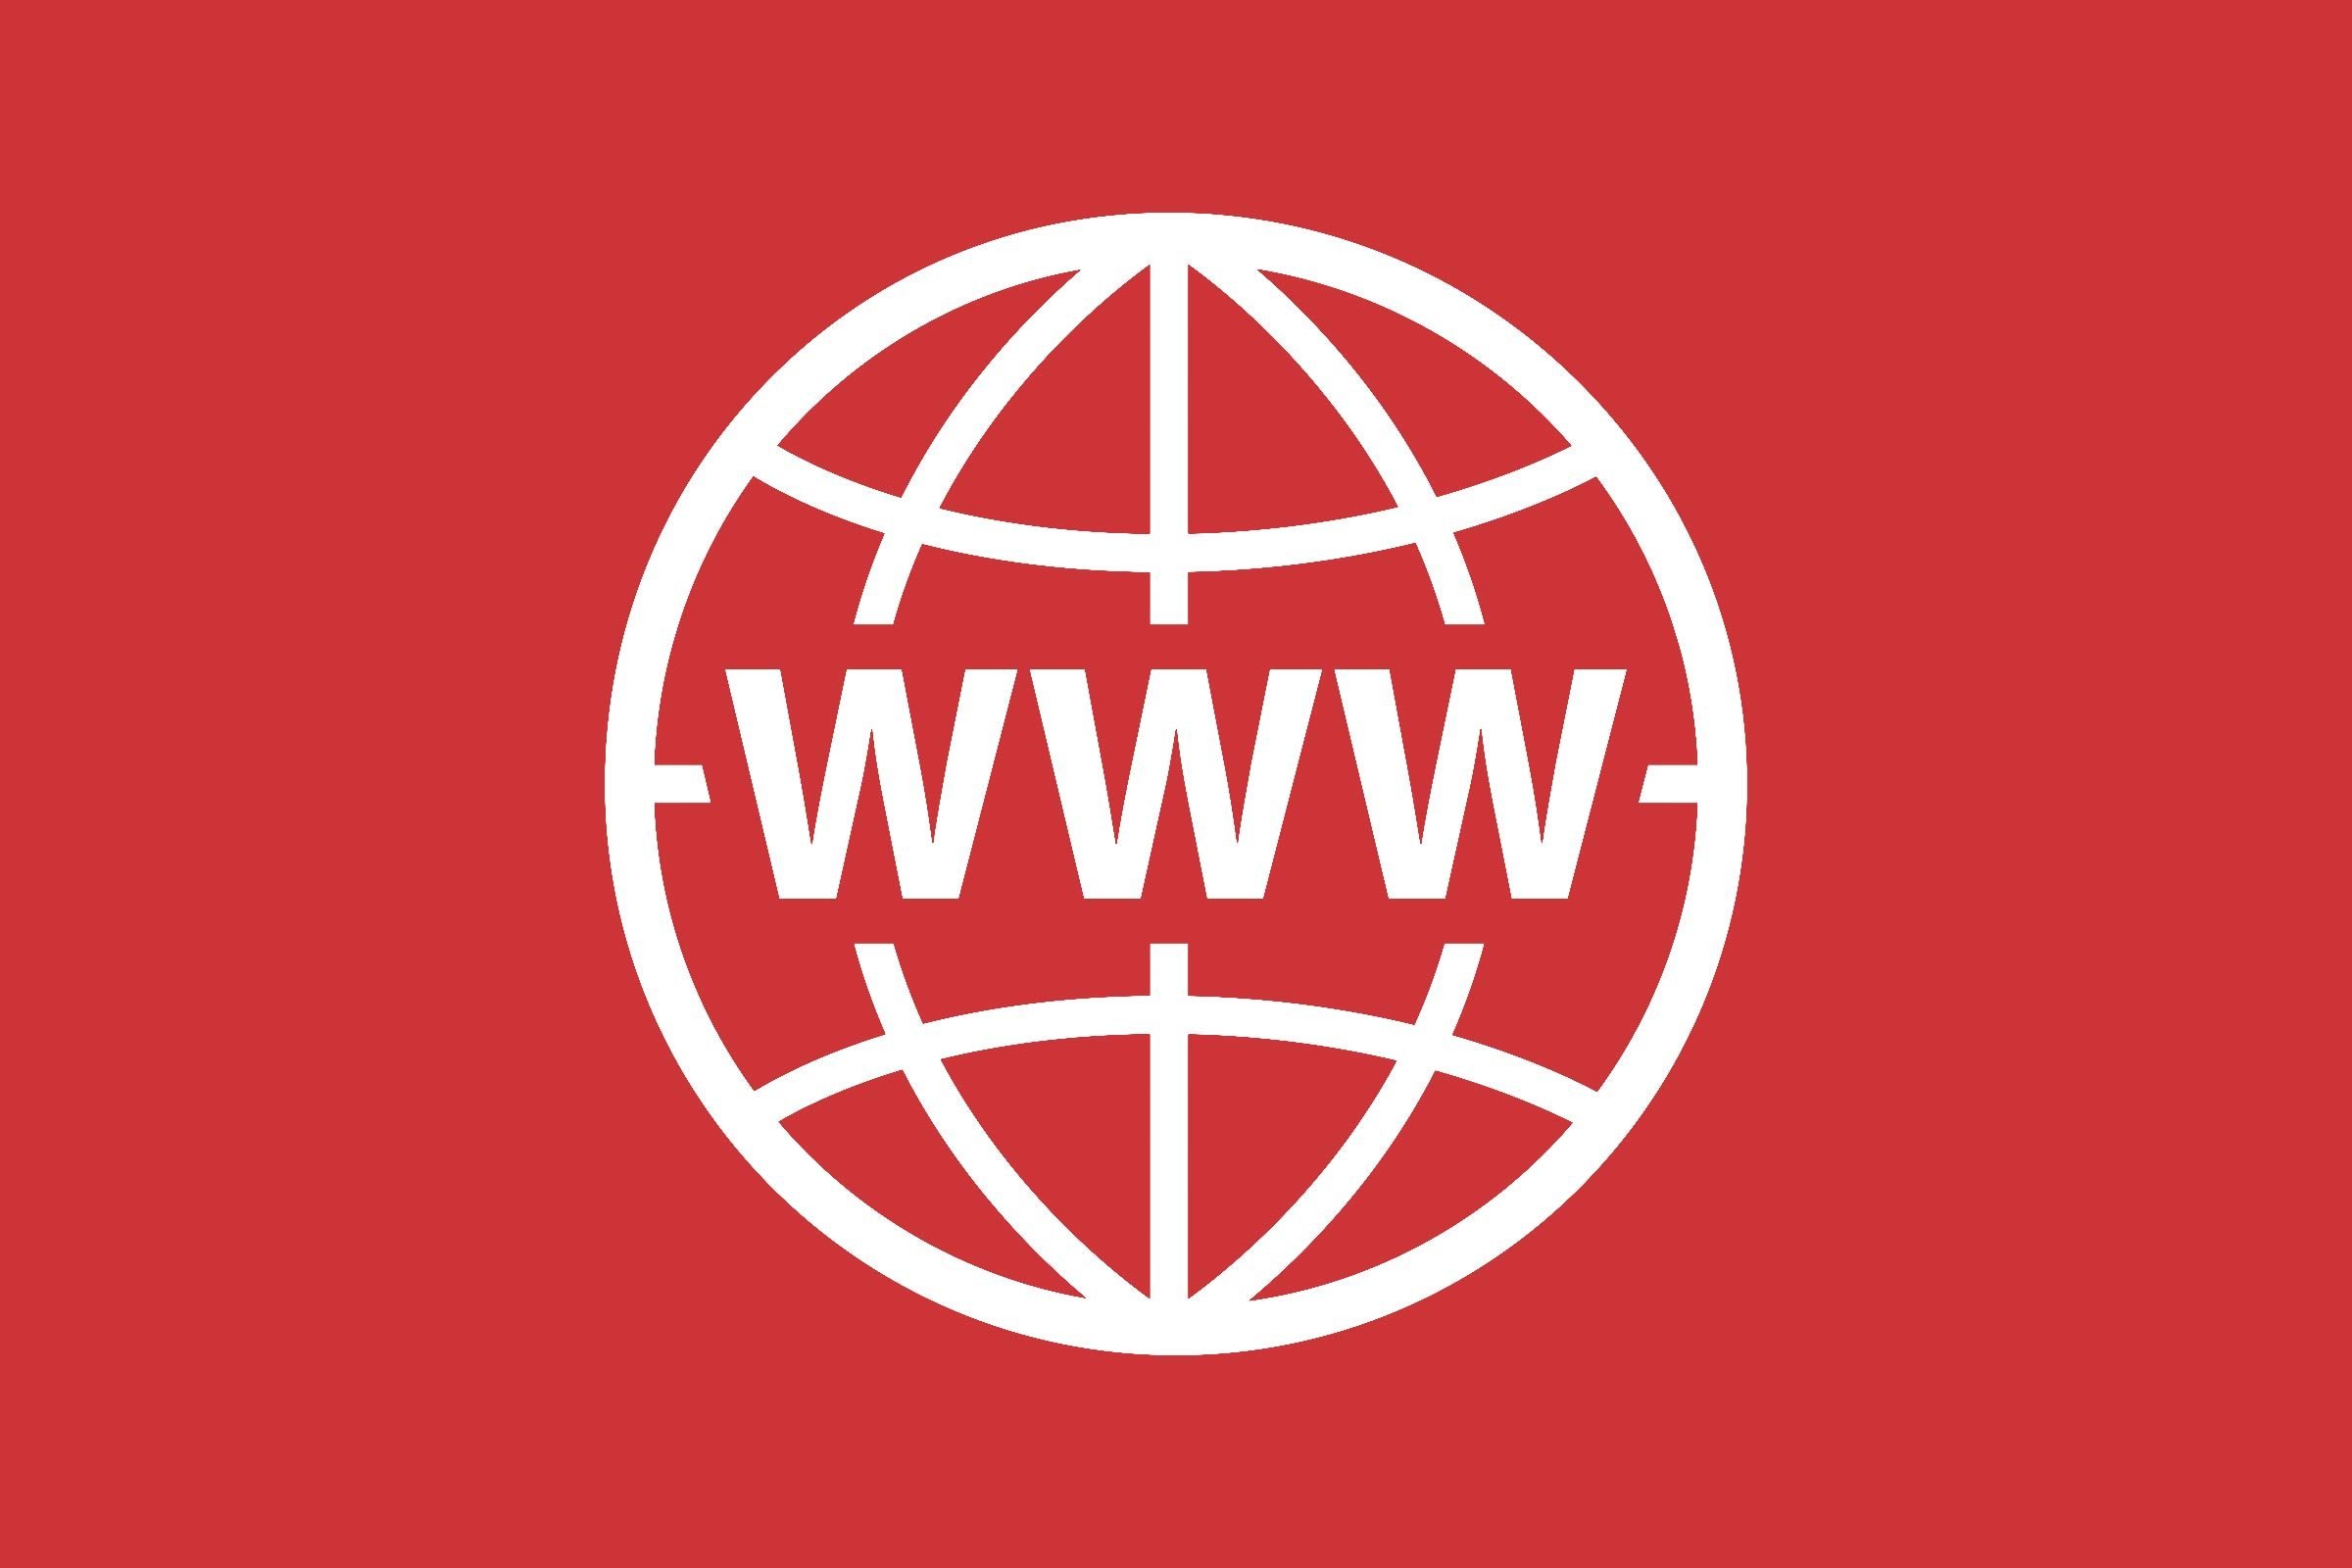 World Wide Web symbol on a red background